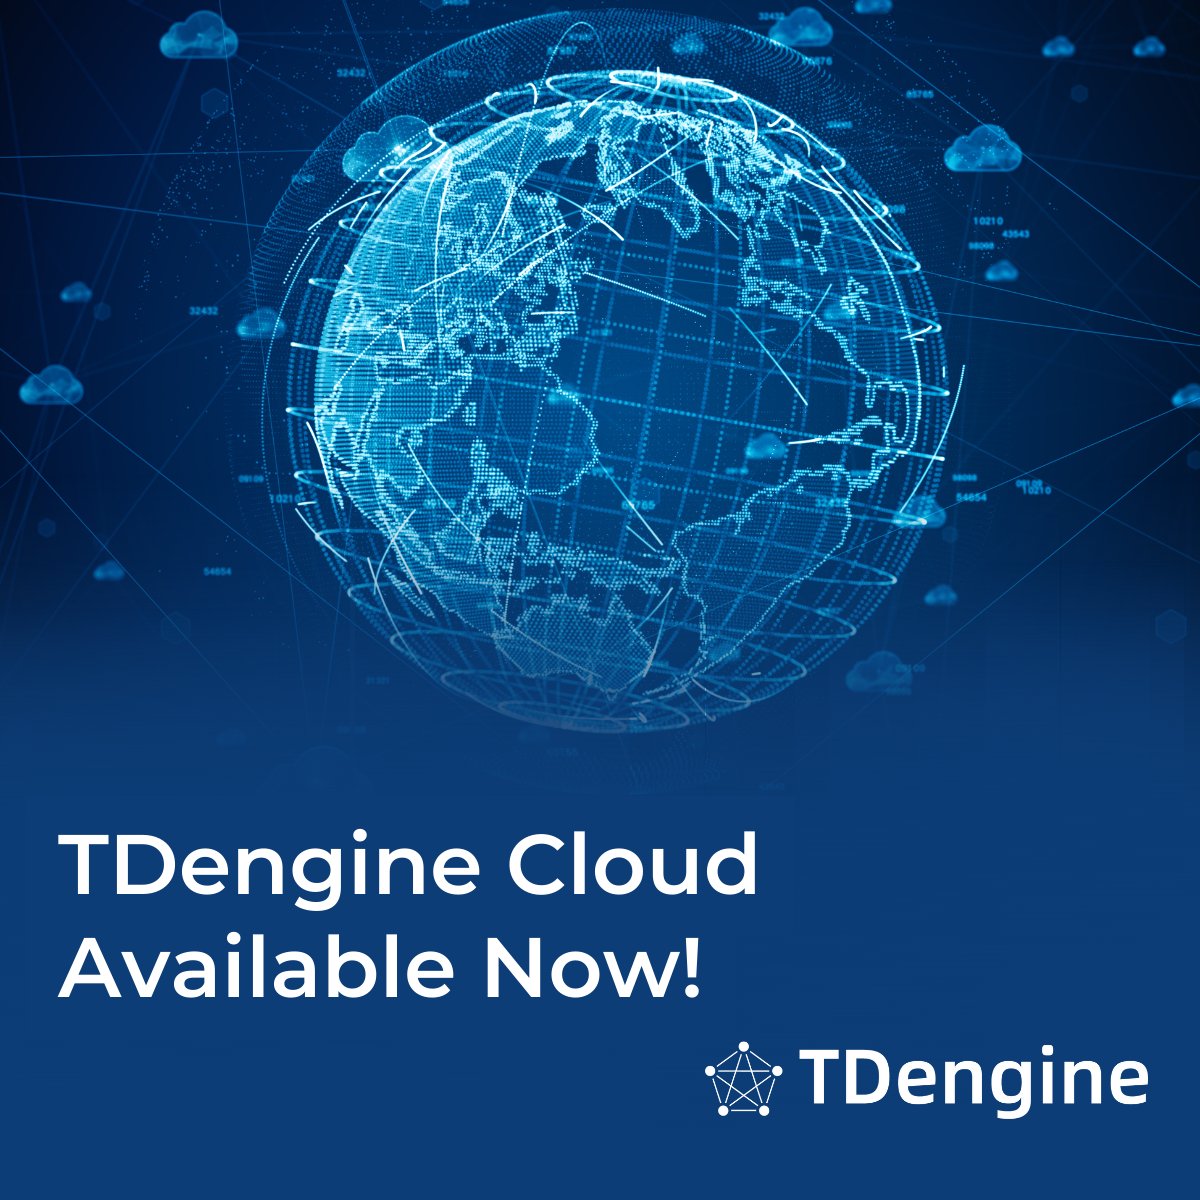 #TDEngineCloud is available now! TDengine Cloud brings all the advantages of TDengine 3.0 in a fully managed, cloud-native solution. Get started today ➡️ ecs.page.link/WqjRn 

#opensource #TDengine #TSDB #timeseriesdatabase